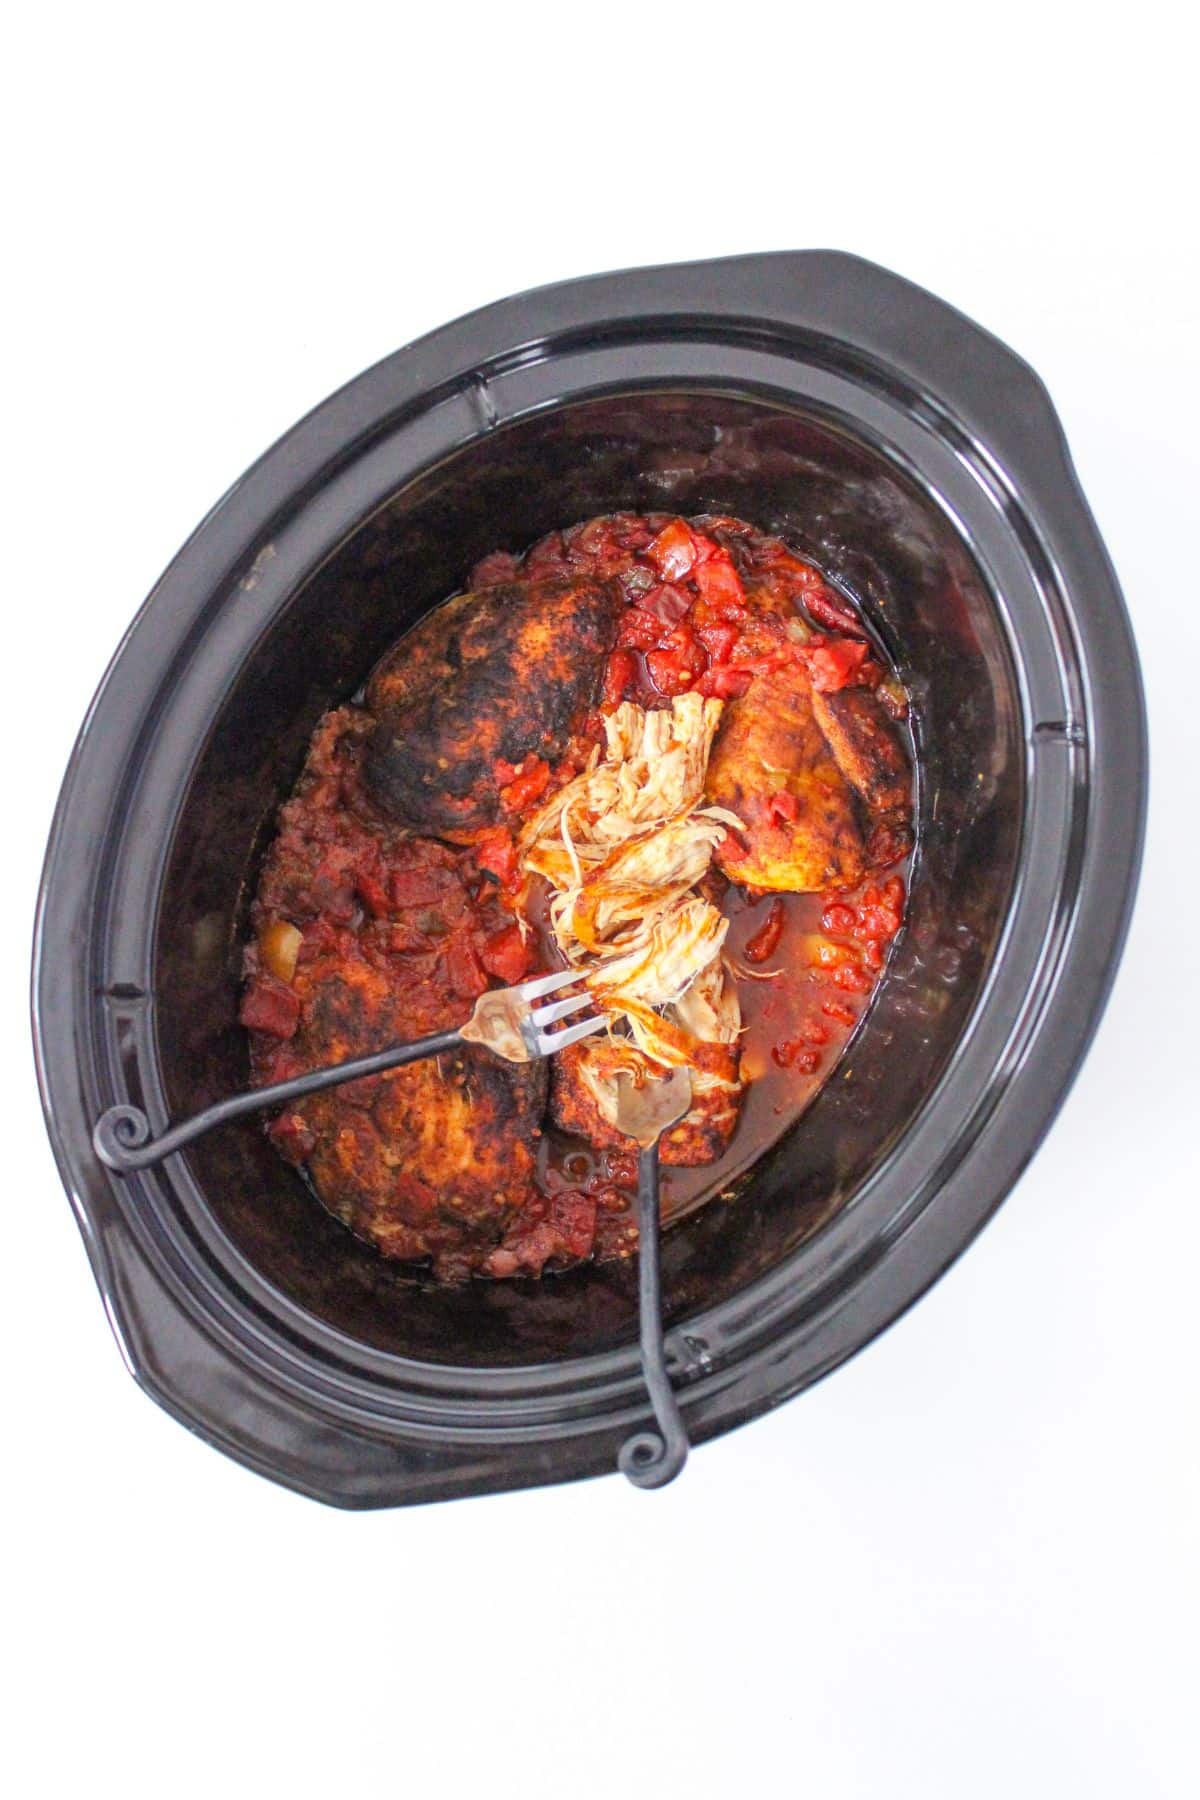 seasoned chicken breasts with diced tomatoes in a slow cooker insert with two forks